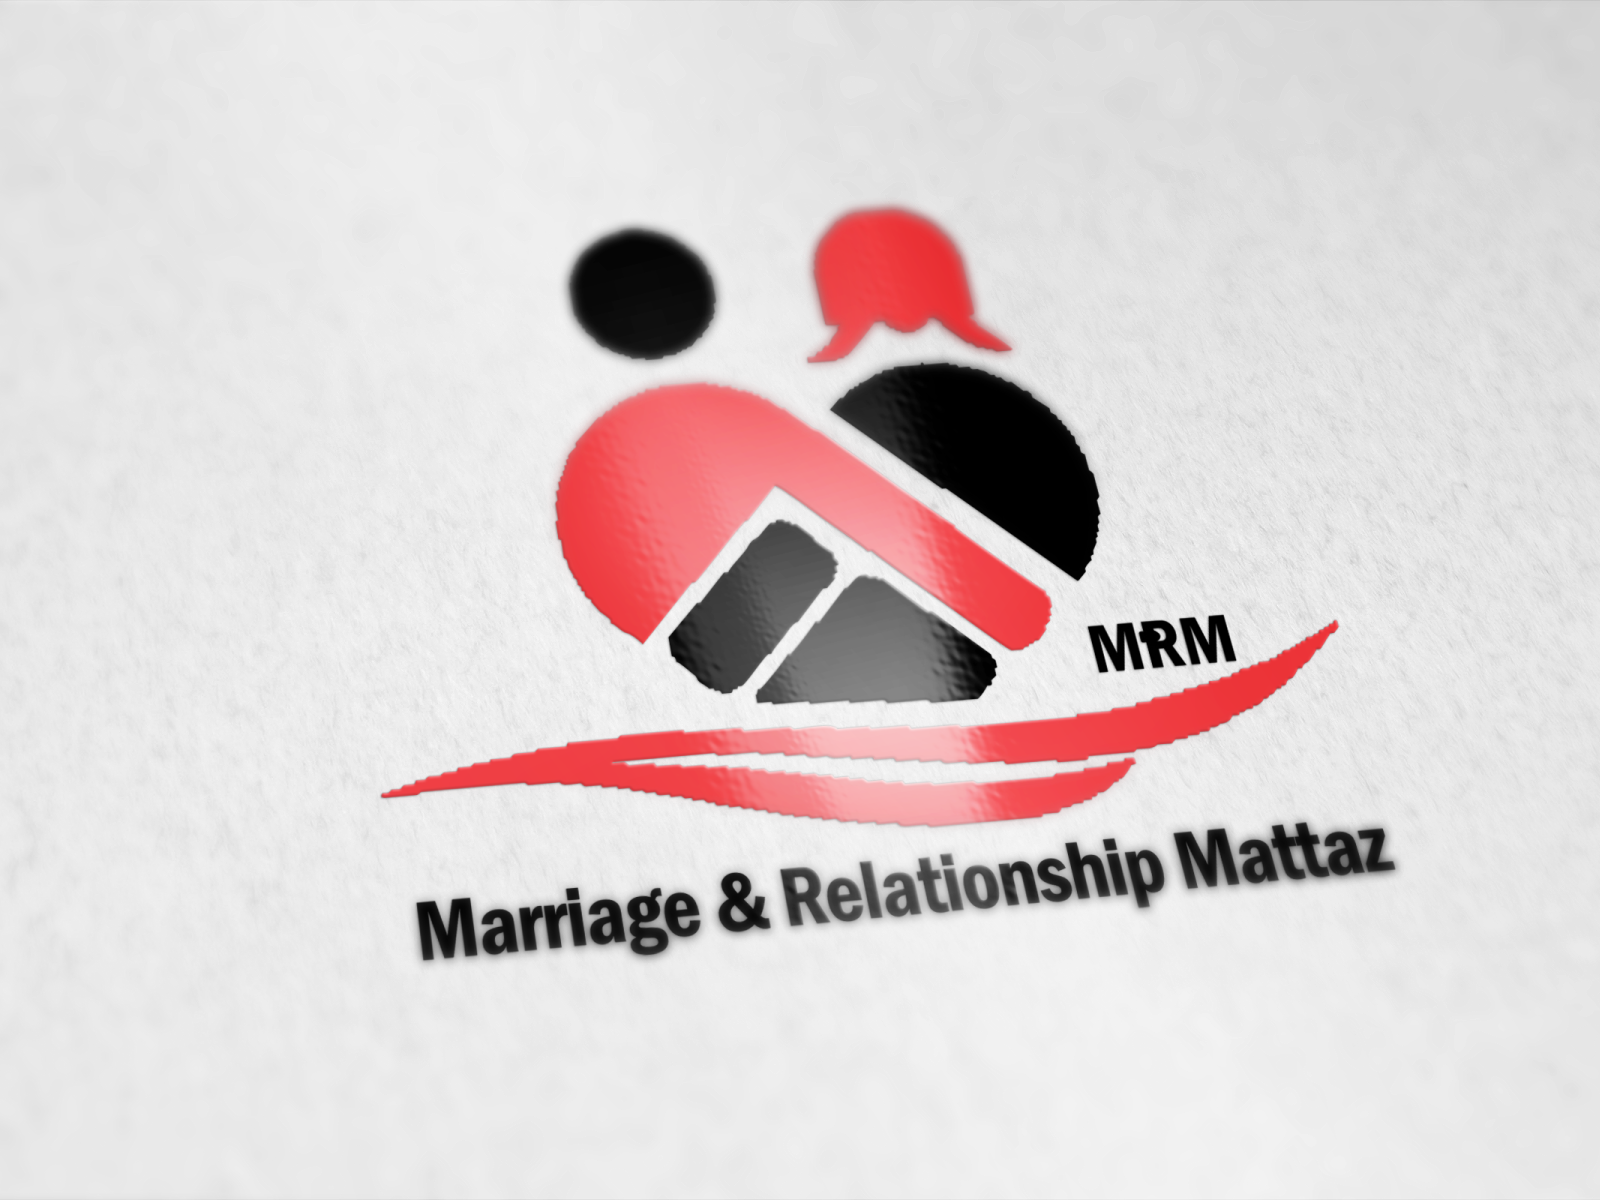 Conserve Matrimony - We understand that getting married and finding the  right life partner